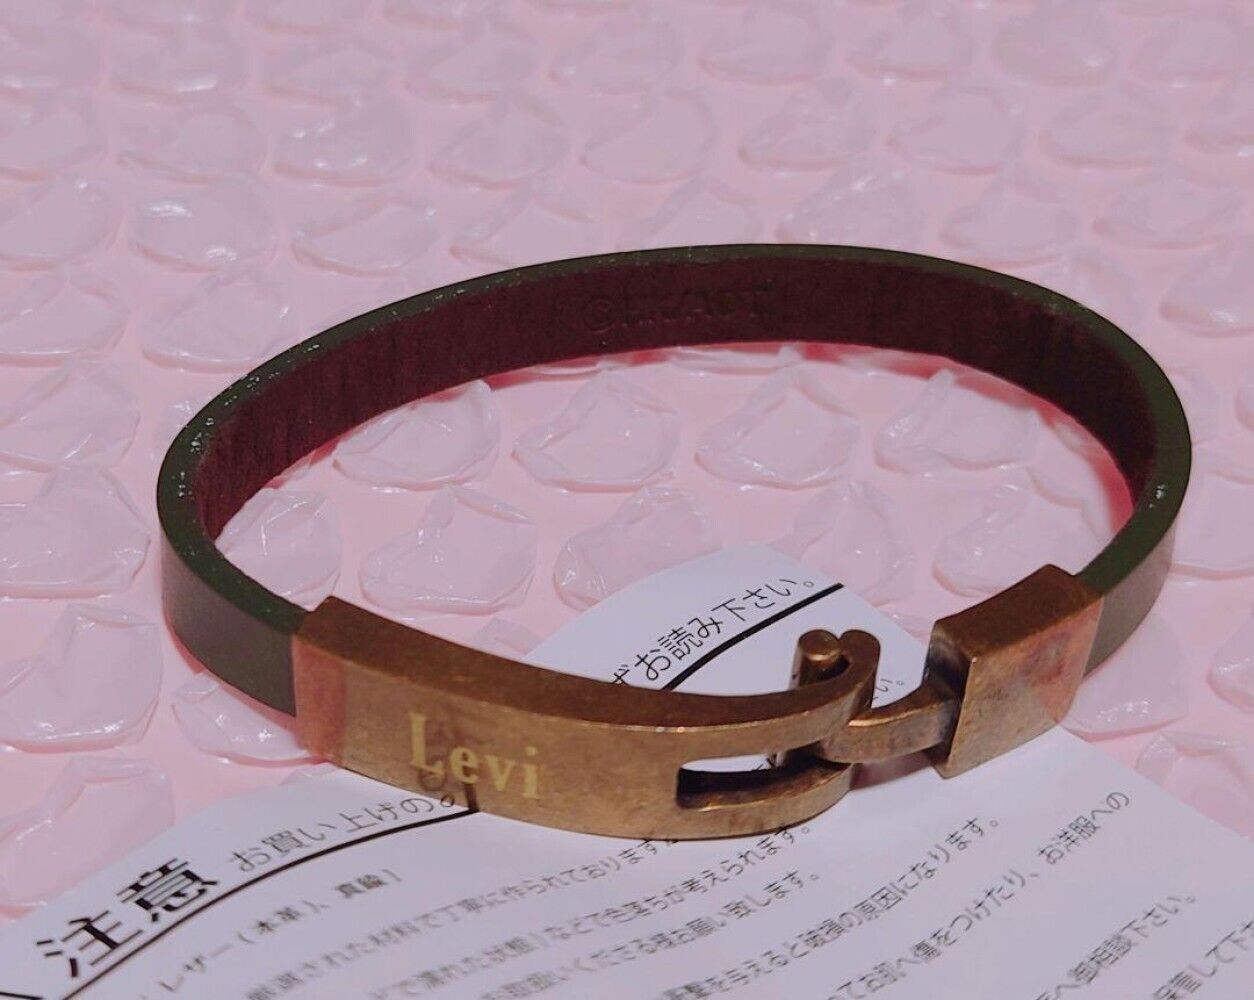 Attack On Titan Levi Model Leather Bracelet Bangle Accessory From Japan No Box